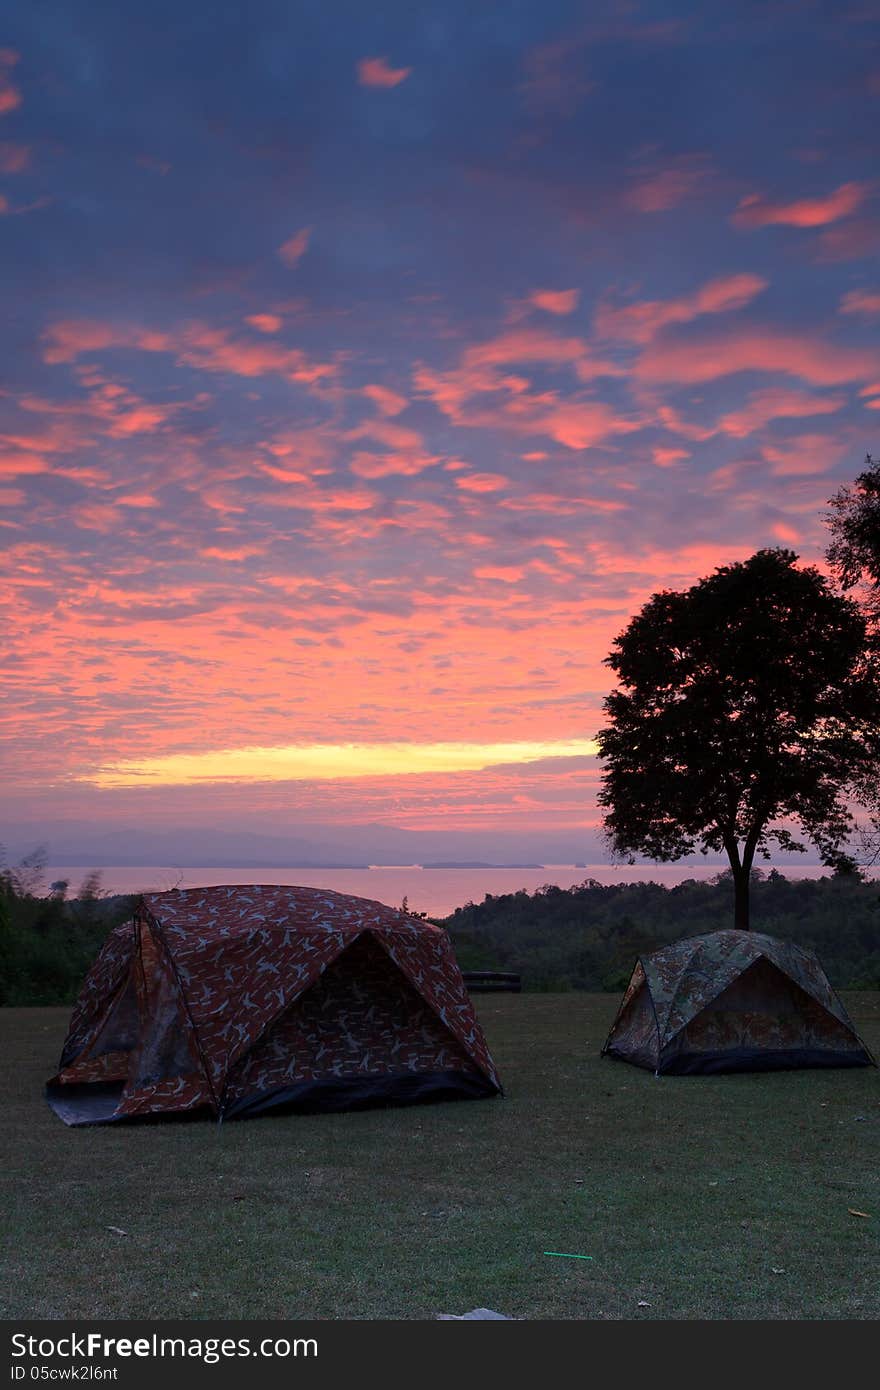 Tents for campers on the hill in the morning in Thailand